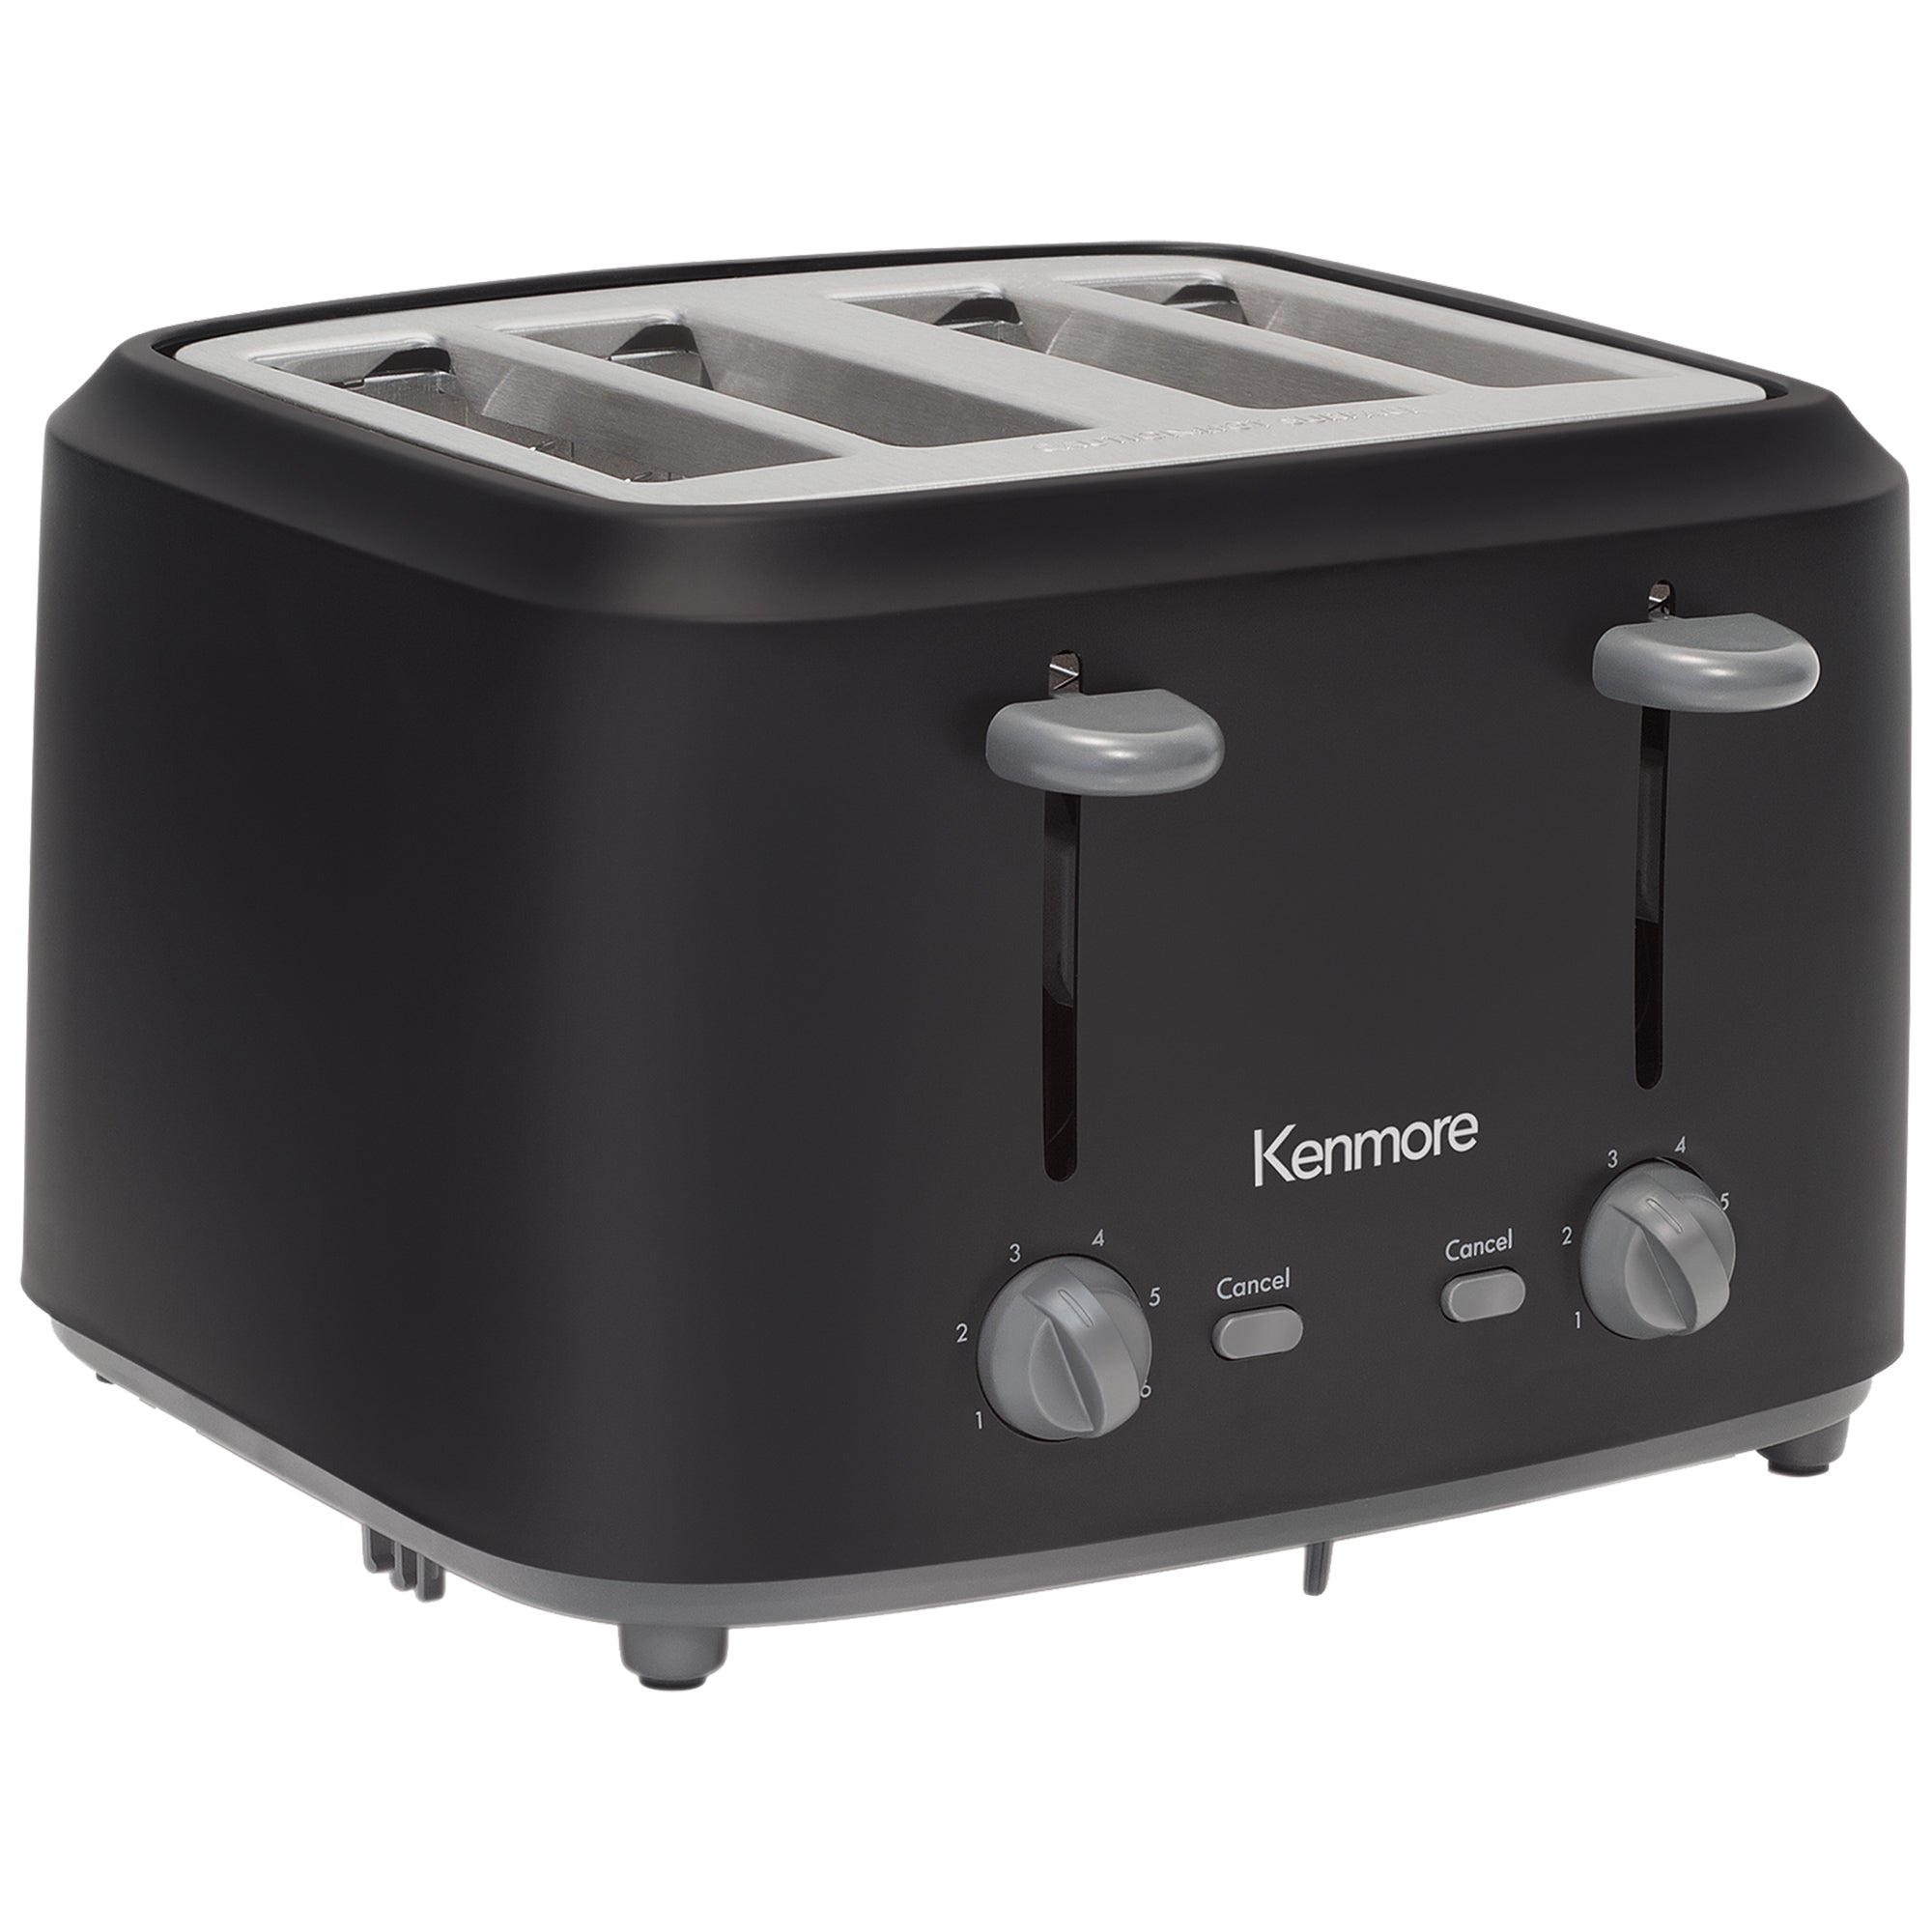 Kenmore 4-slice matte black toaster on a white background